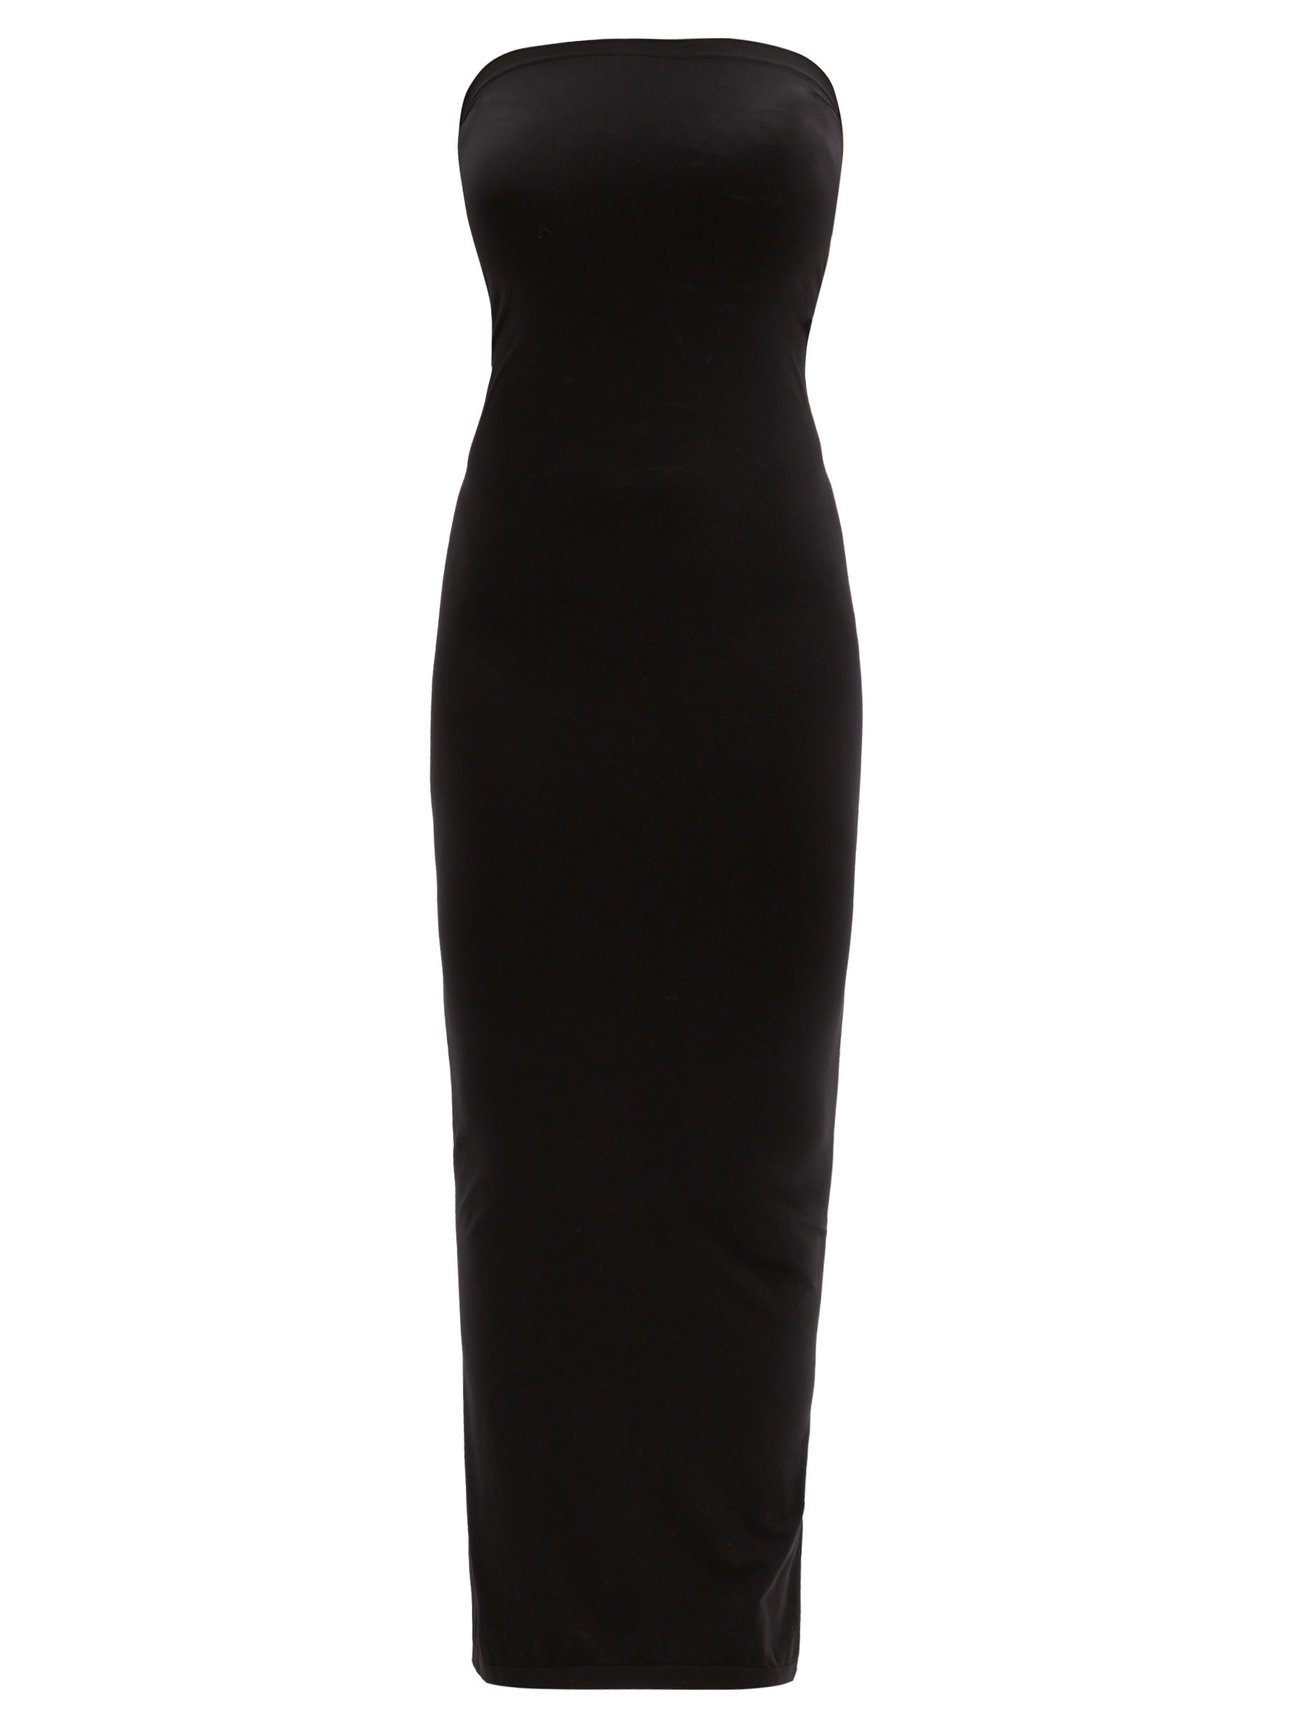  KMystic Seamless Strapless Tube Slip Dress (Black),One Size :  Clothing, Shoes & Jewelry